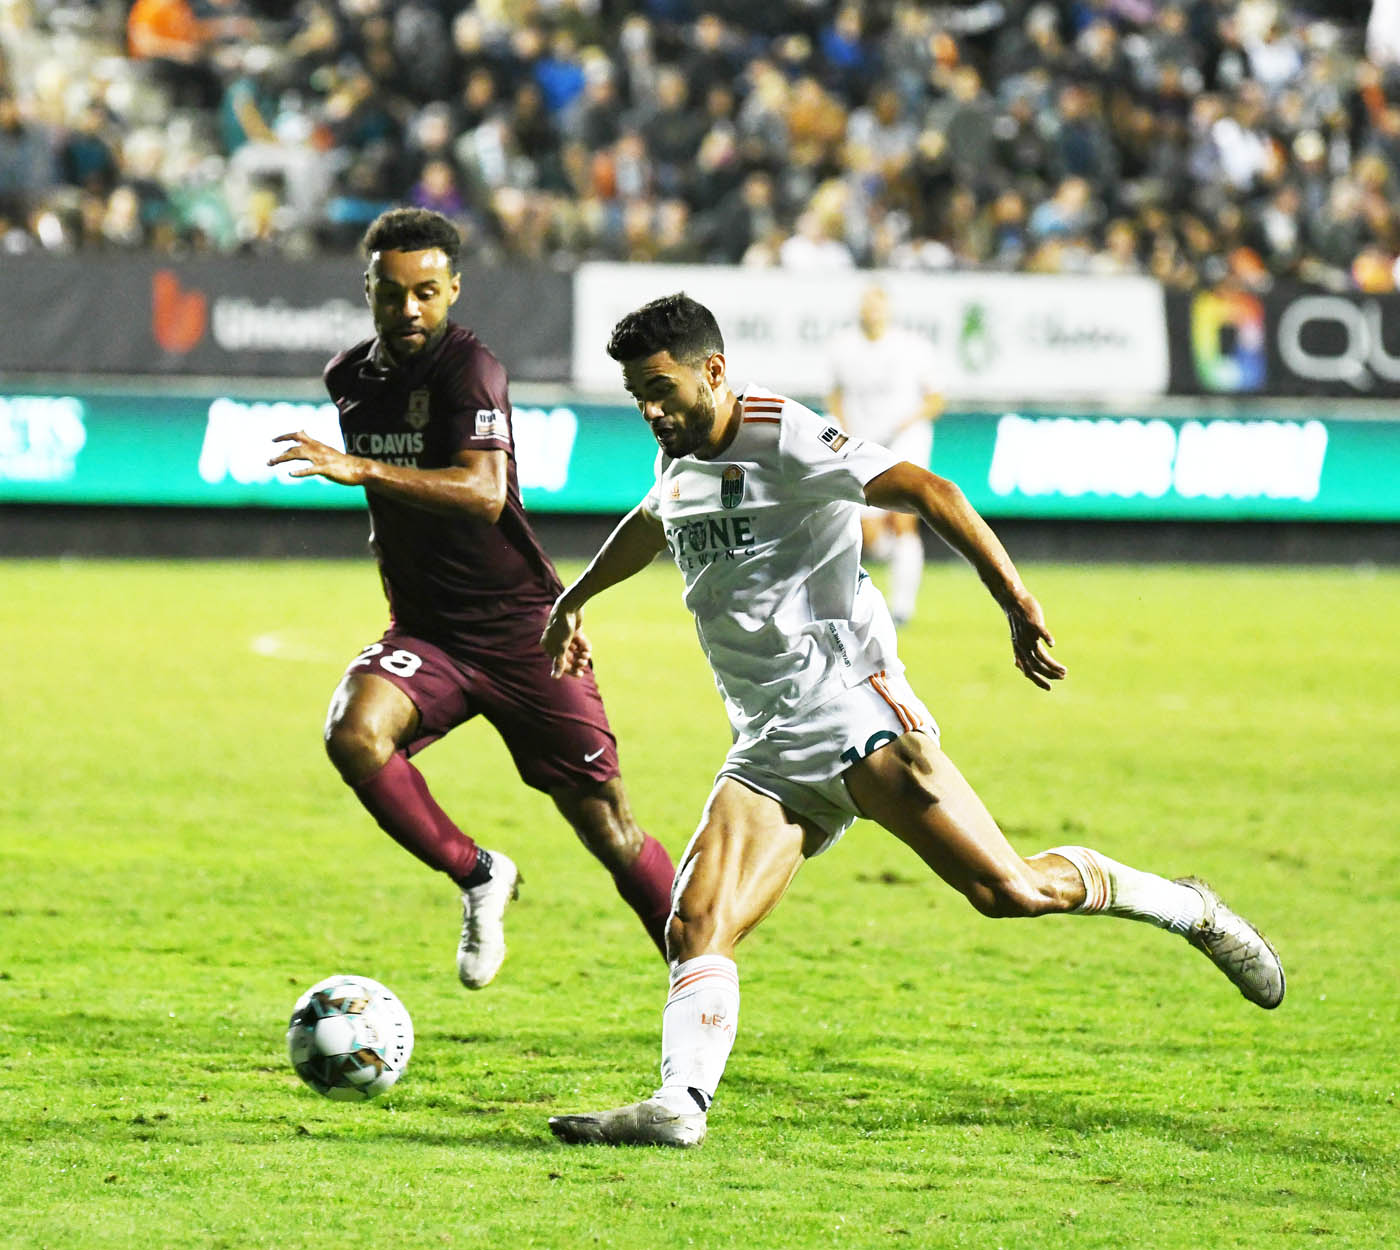 San Diego Loyal Ousted in USL Playoffs, Ending Loss to Oakland with 8 on  Field - Times of San Diego